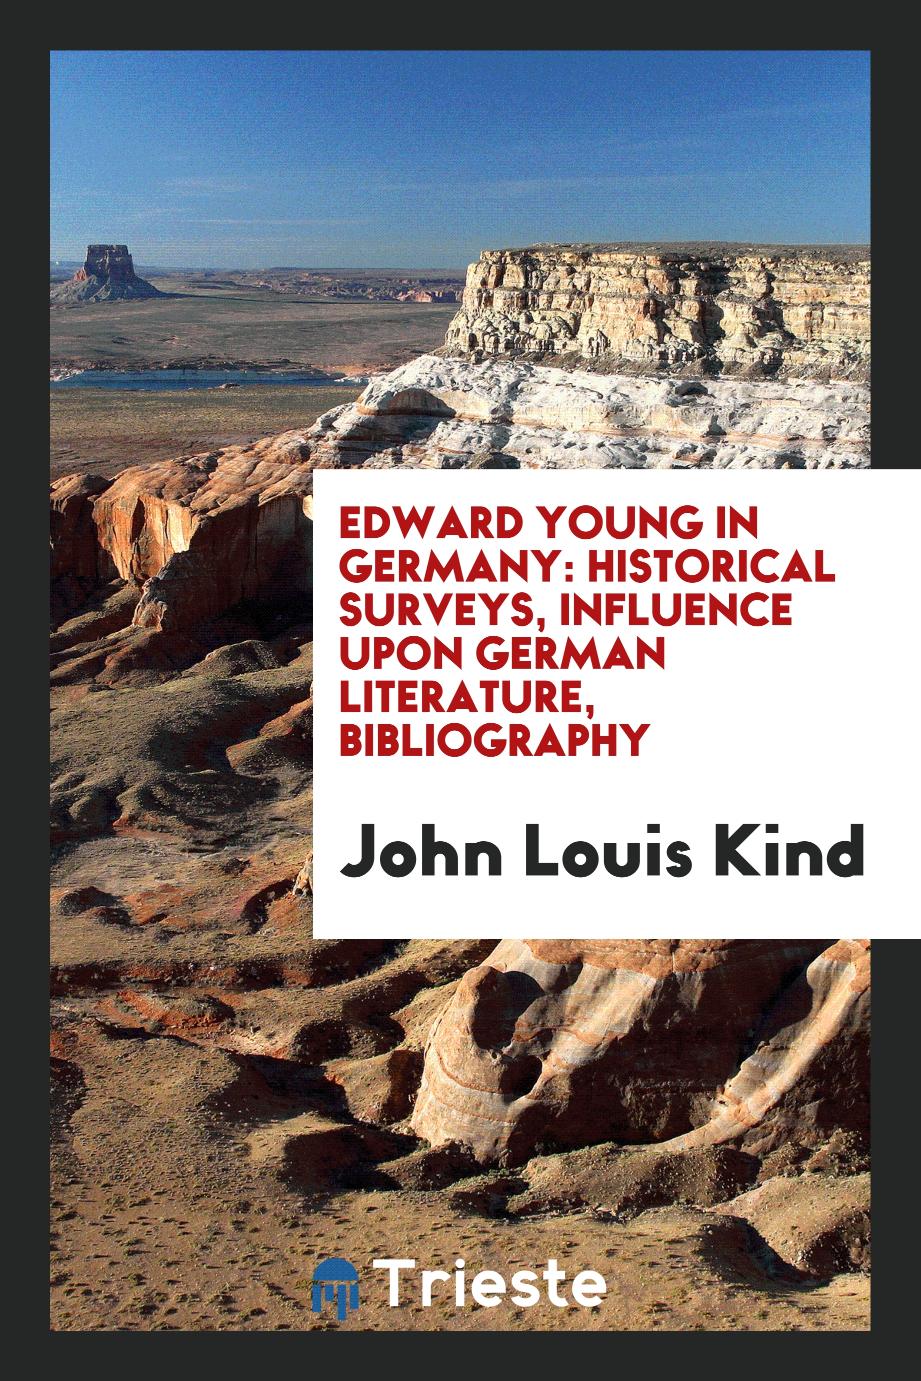 Edward Young in Germany: Historical Surveys, Influence upon German Literature, Bibliography